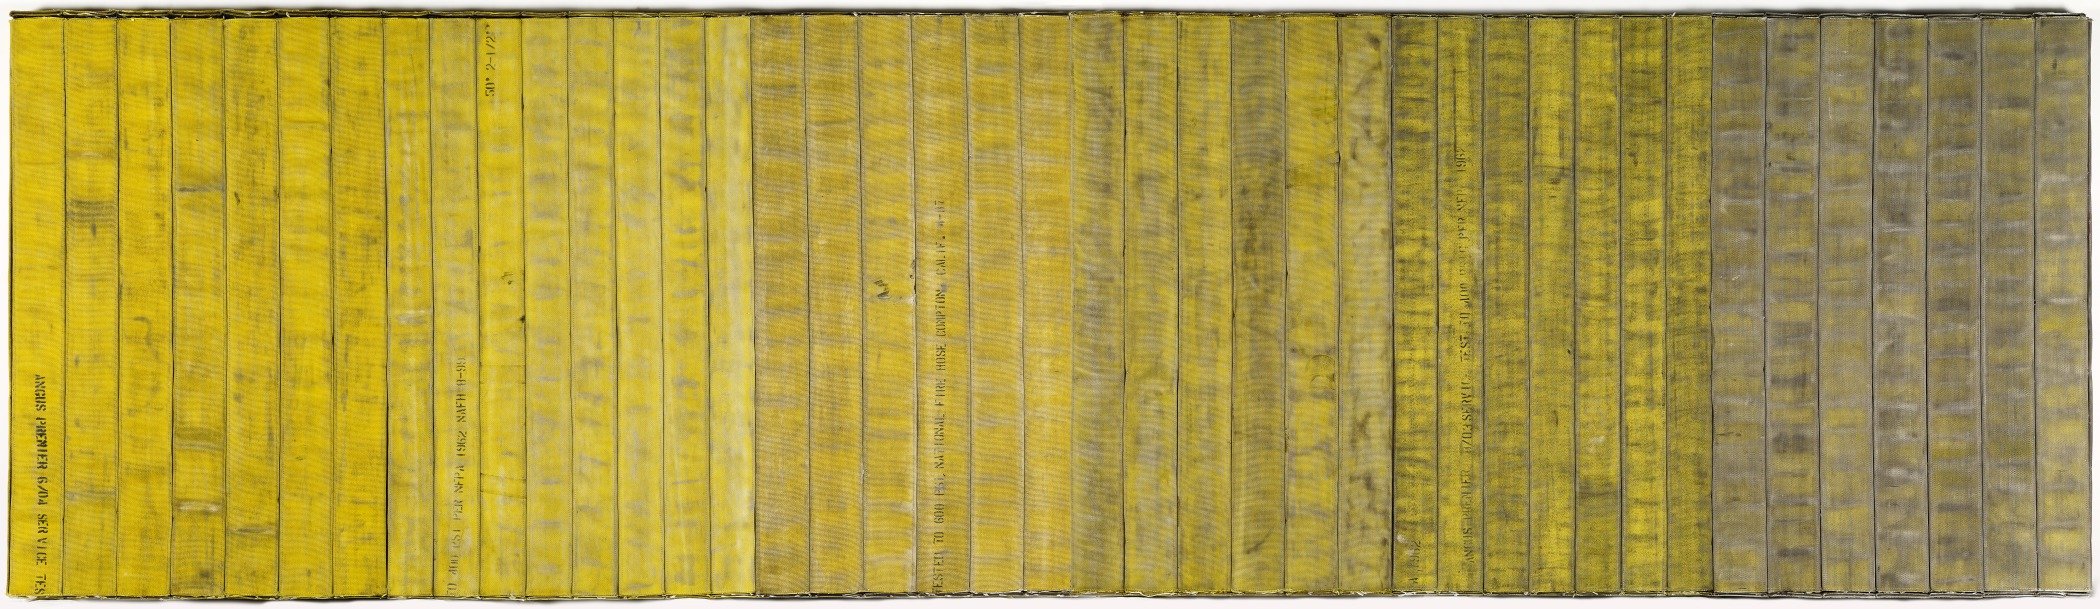 Long horizontal panel of firehoses sewed together with the a gradient of the yellow being brighter/cleaner from the left that slowly fades into darker/more weathered tones towards the right 